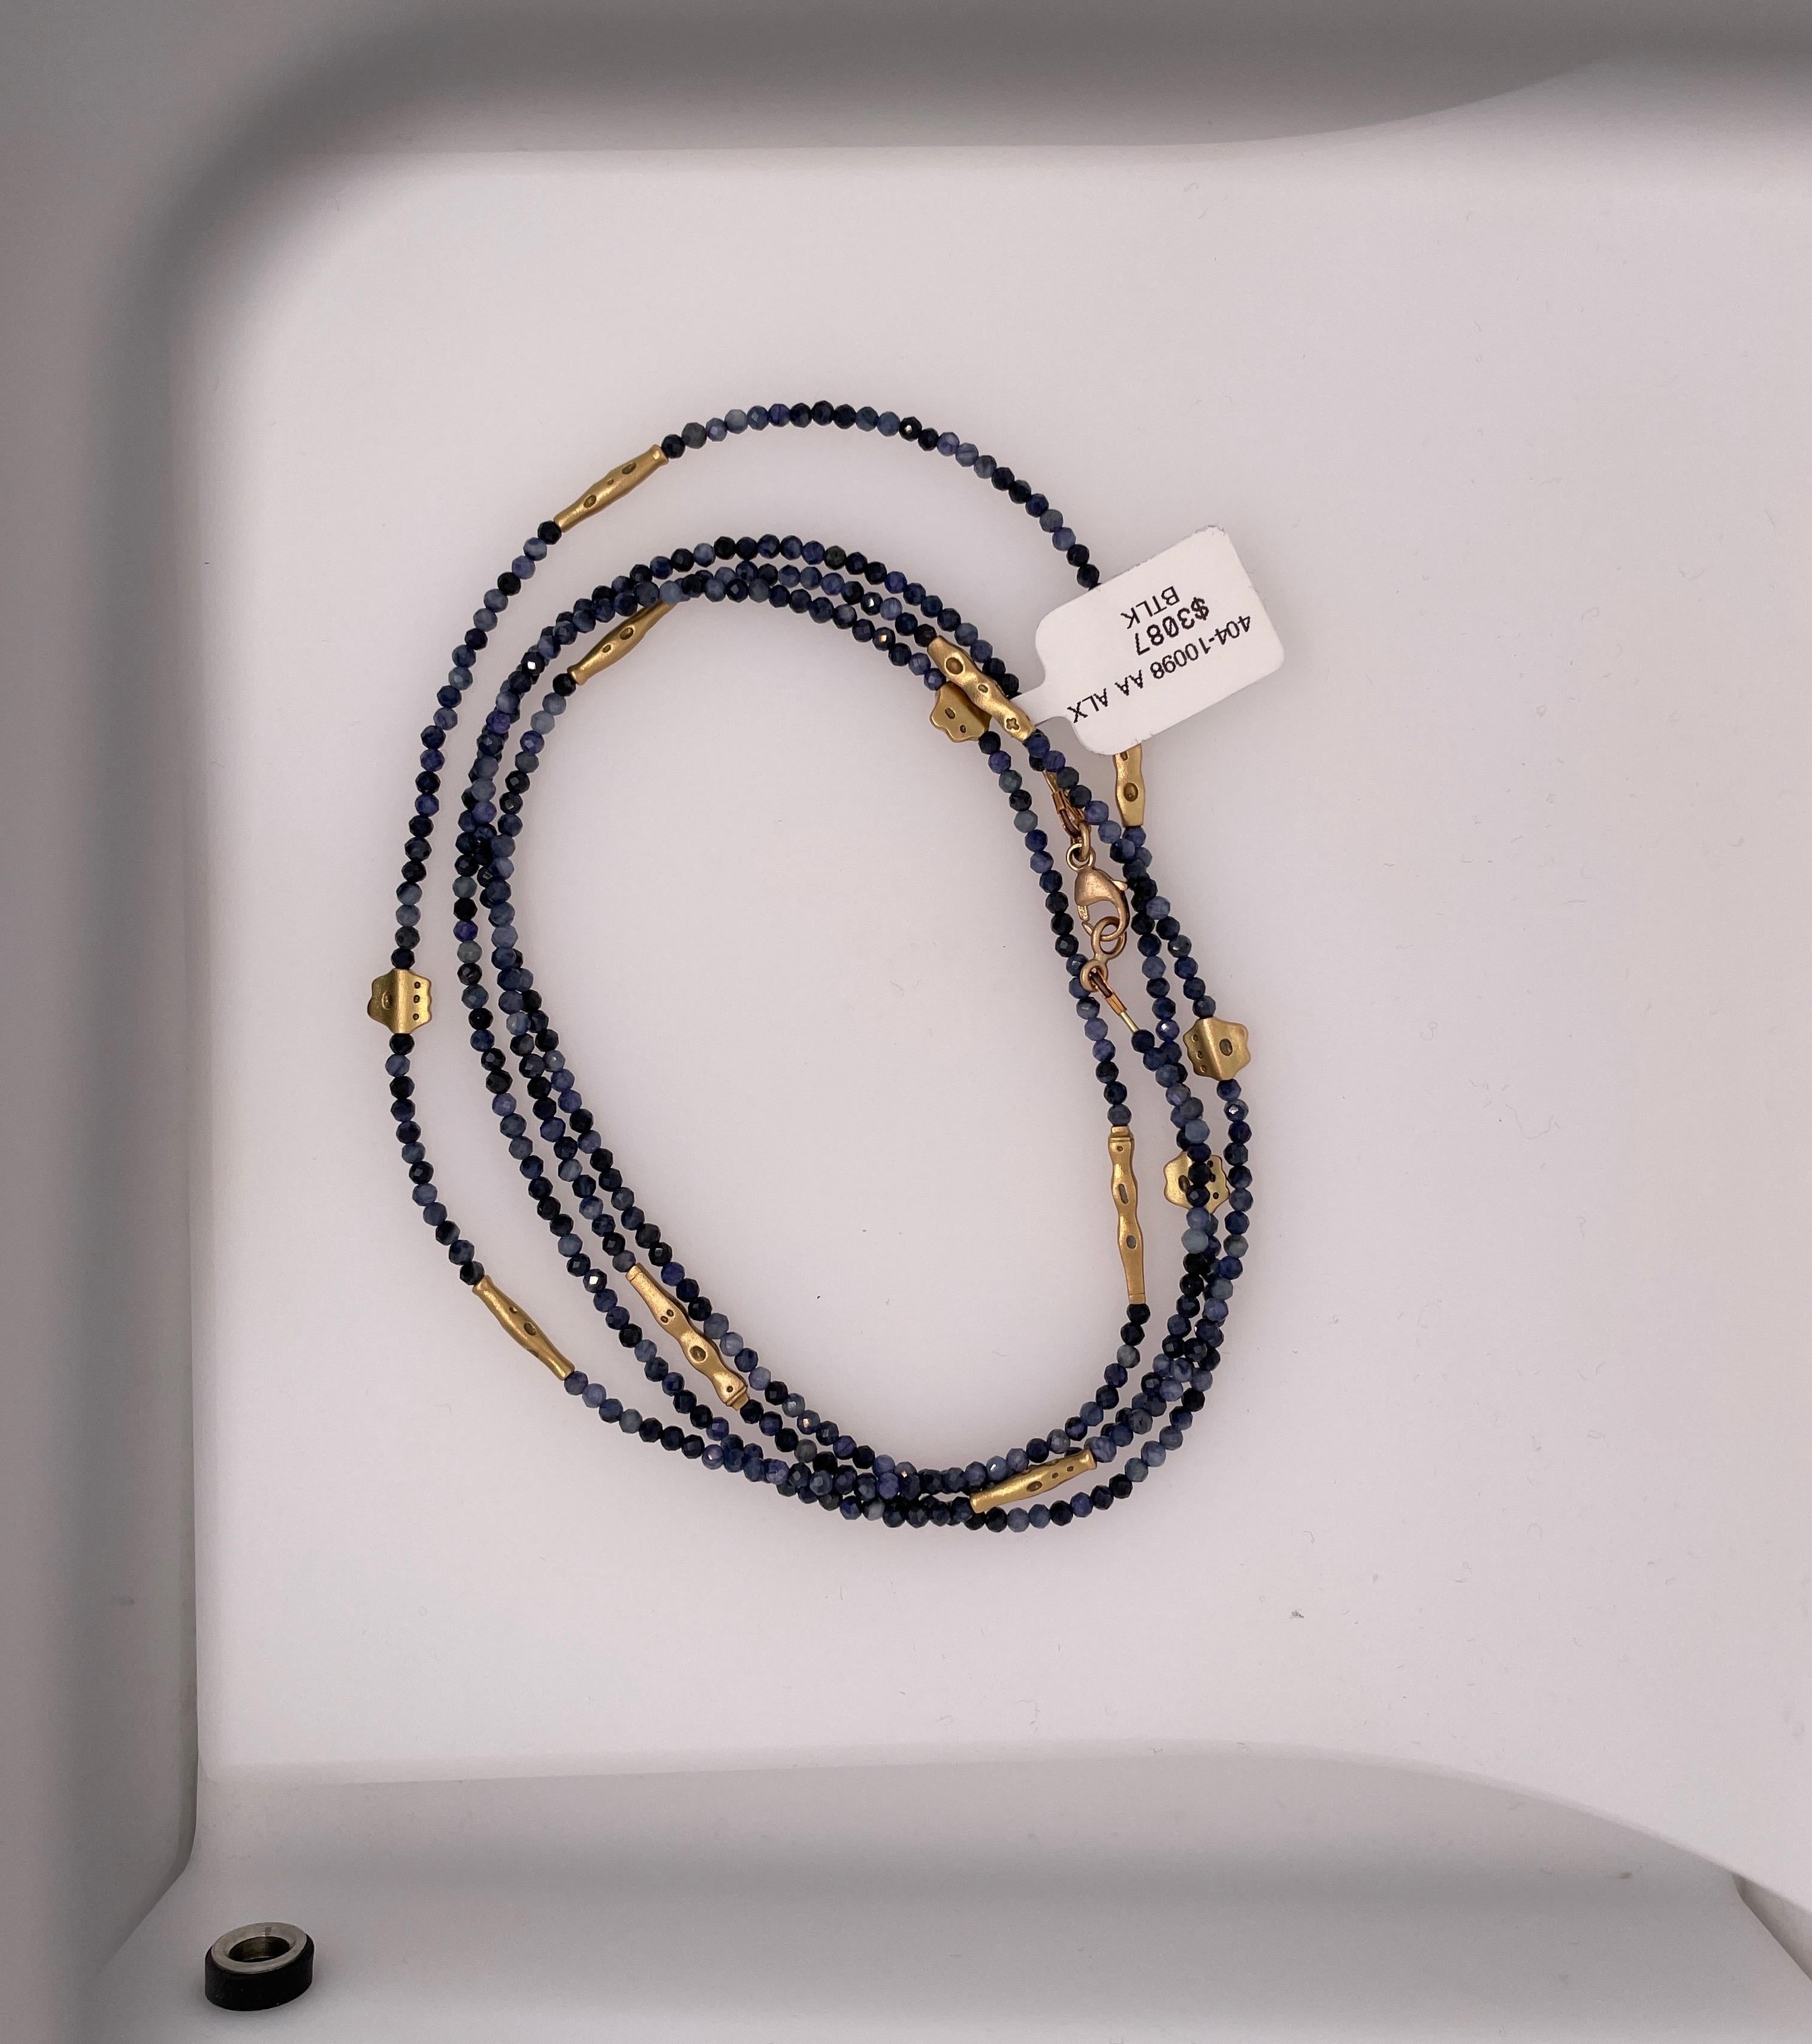 This Milky Blue Sapphire and 18k Gold beaded necklace comes from Sepkus’ “Flora” collection. Combine this 38” inch beaded sapphire piece with any of Alex Sepkus’ beautiful pieces to accomplish an elegant yet casual motif that will stand the test of